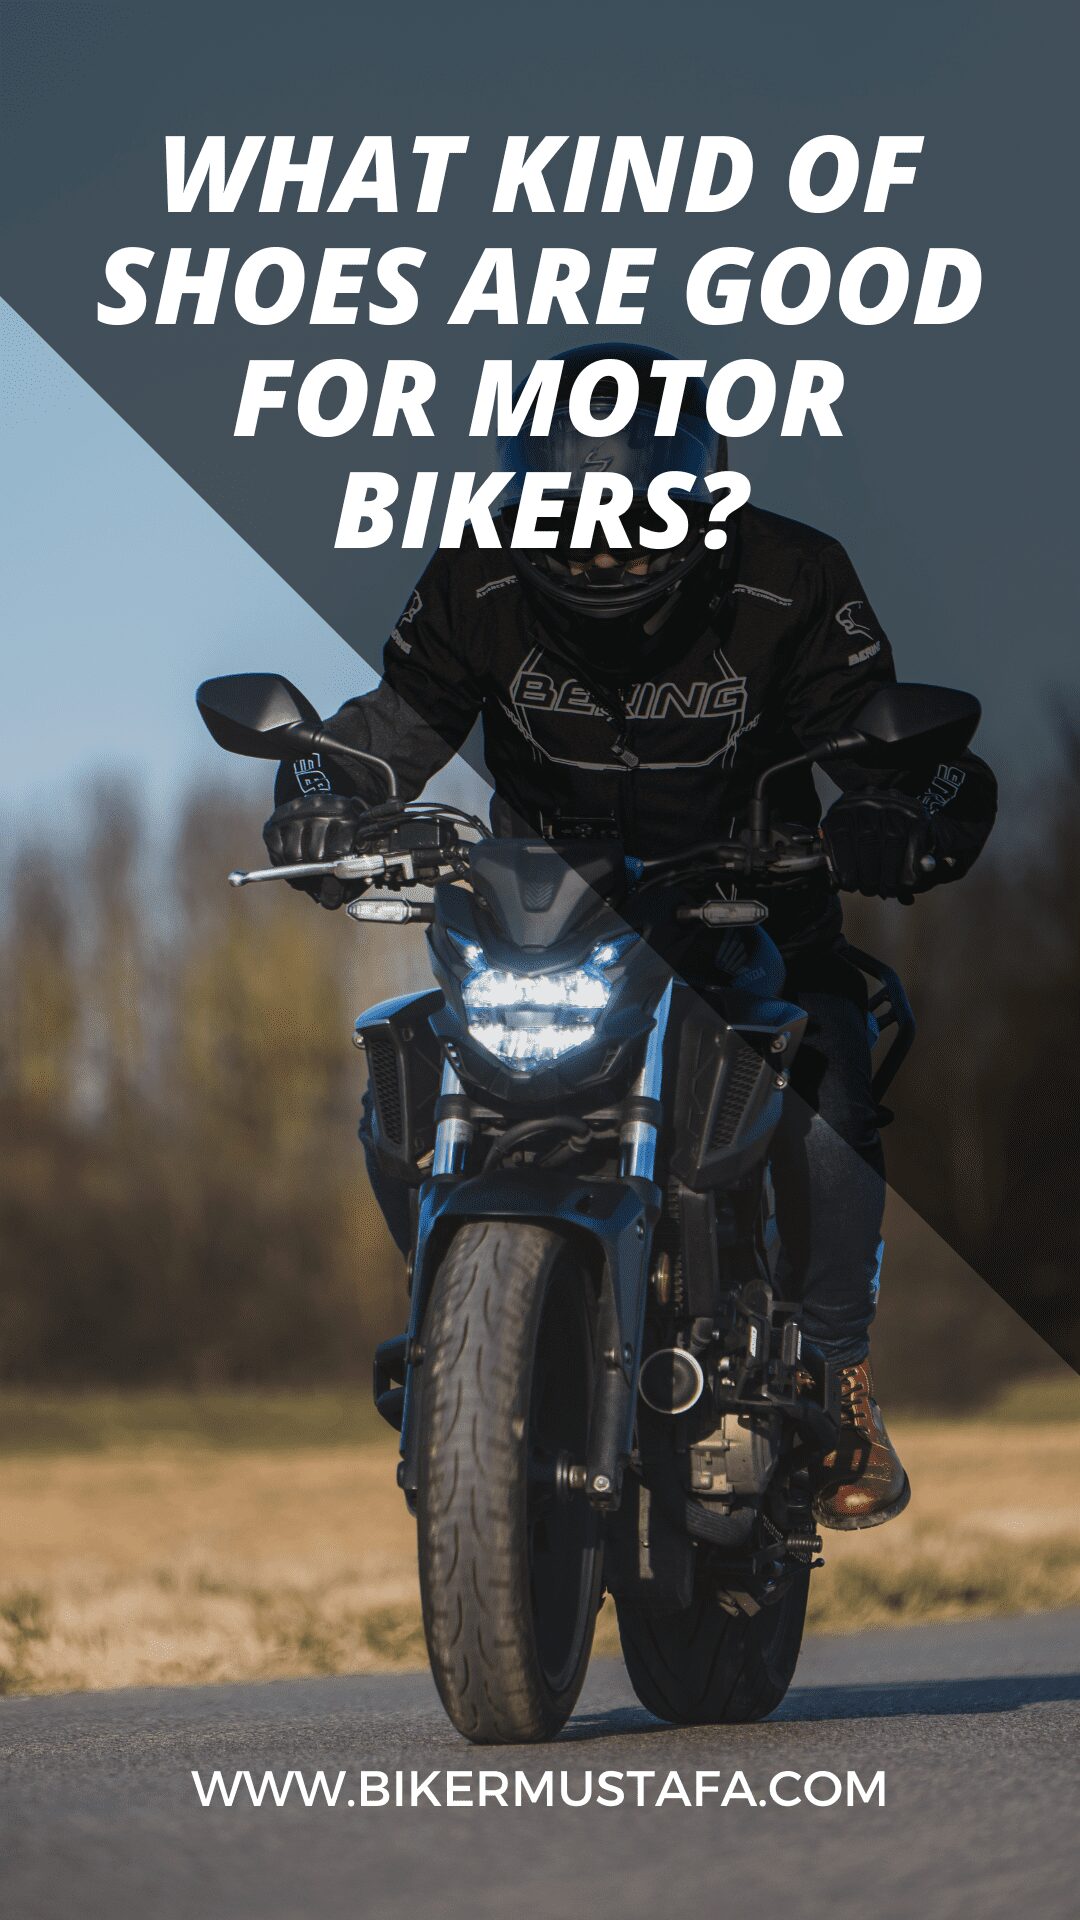 What Kind Of Shoes Are Good For Motor Bikers?